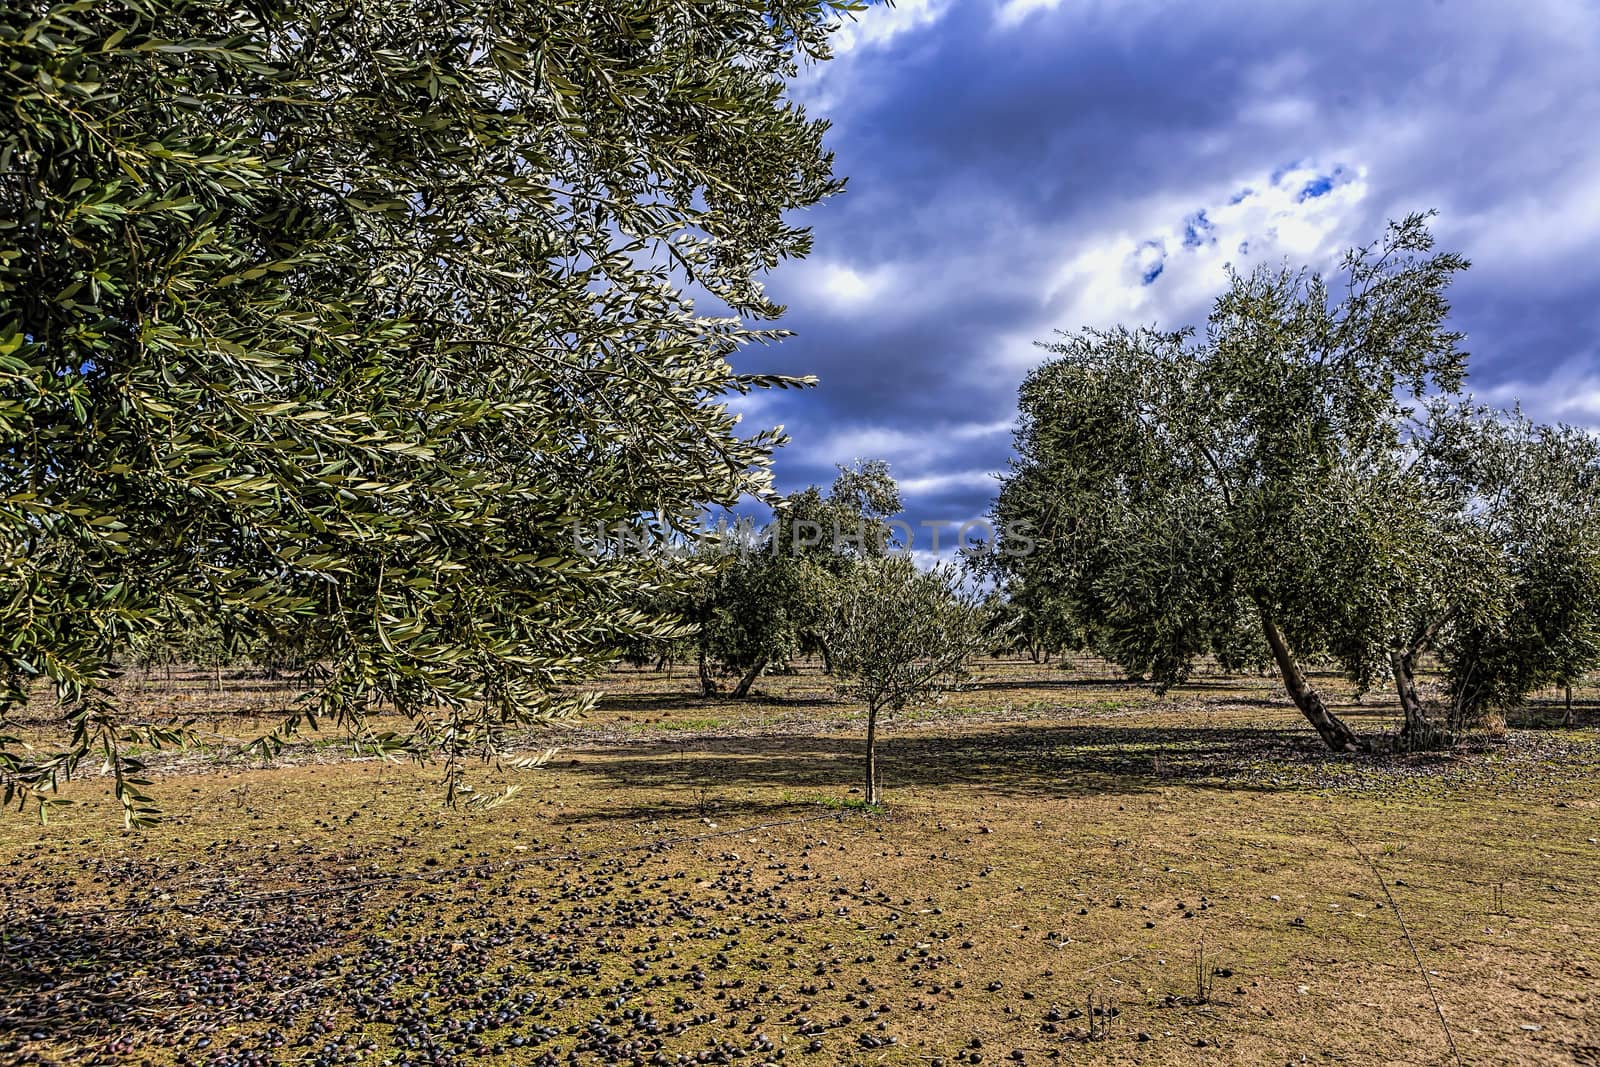 Field of olive trees by digicomphoto